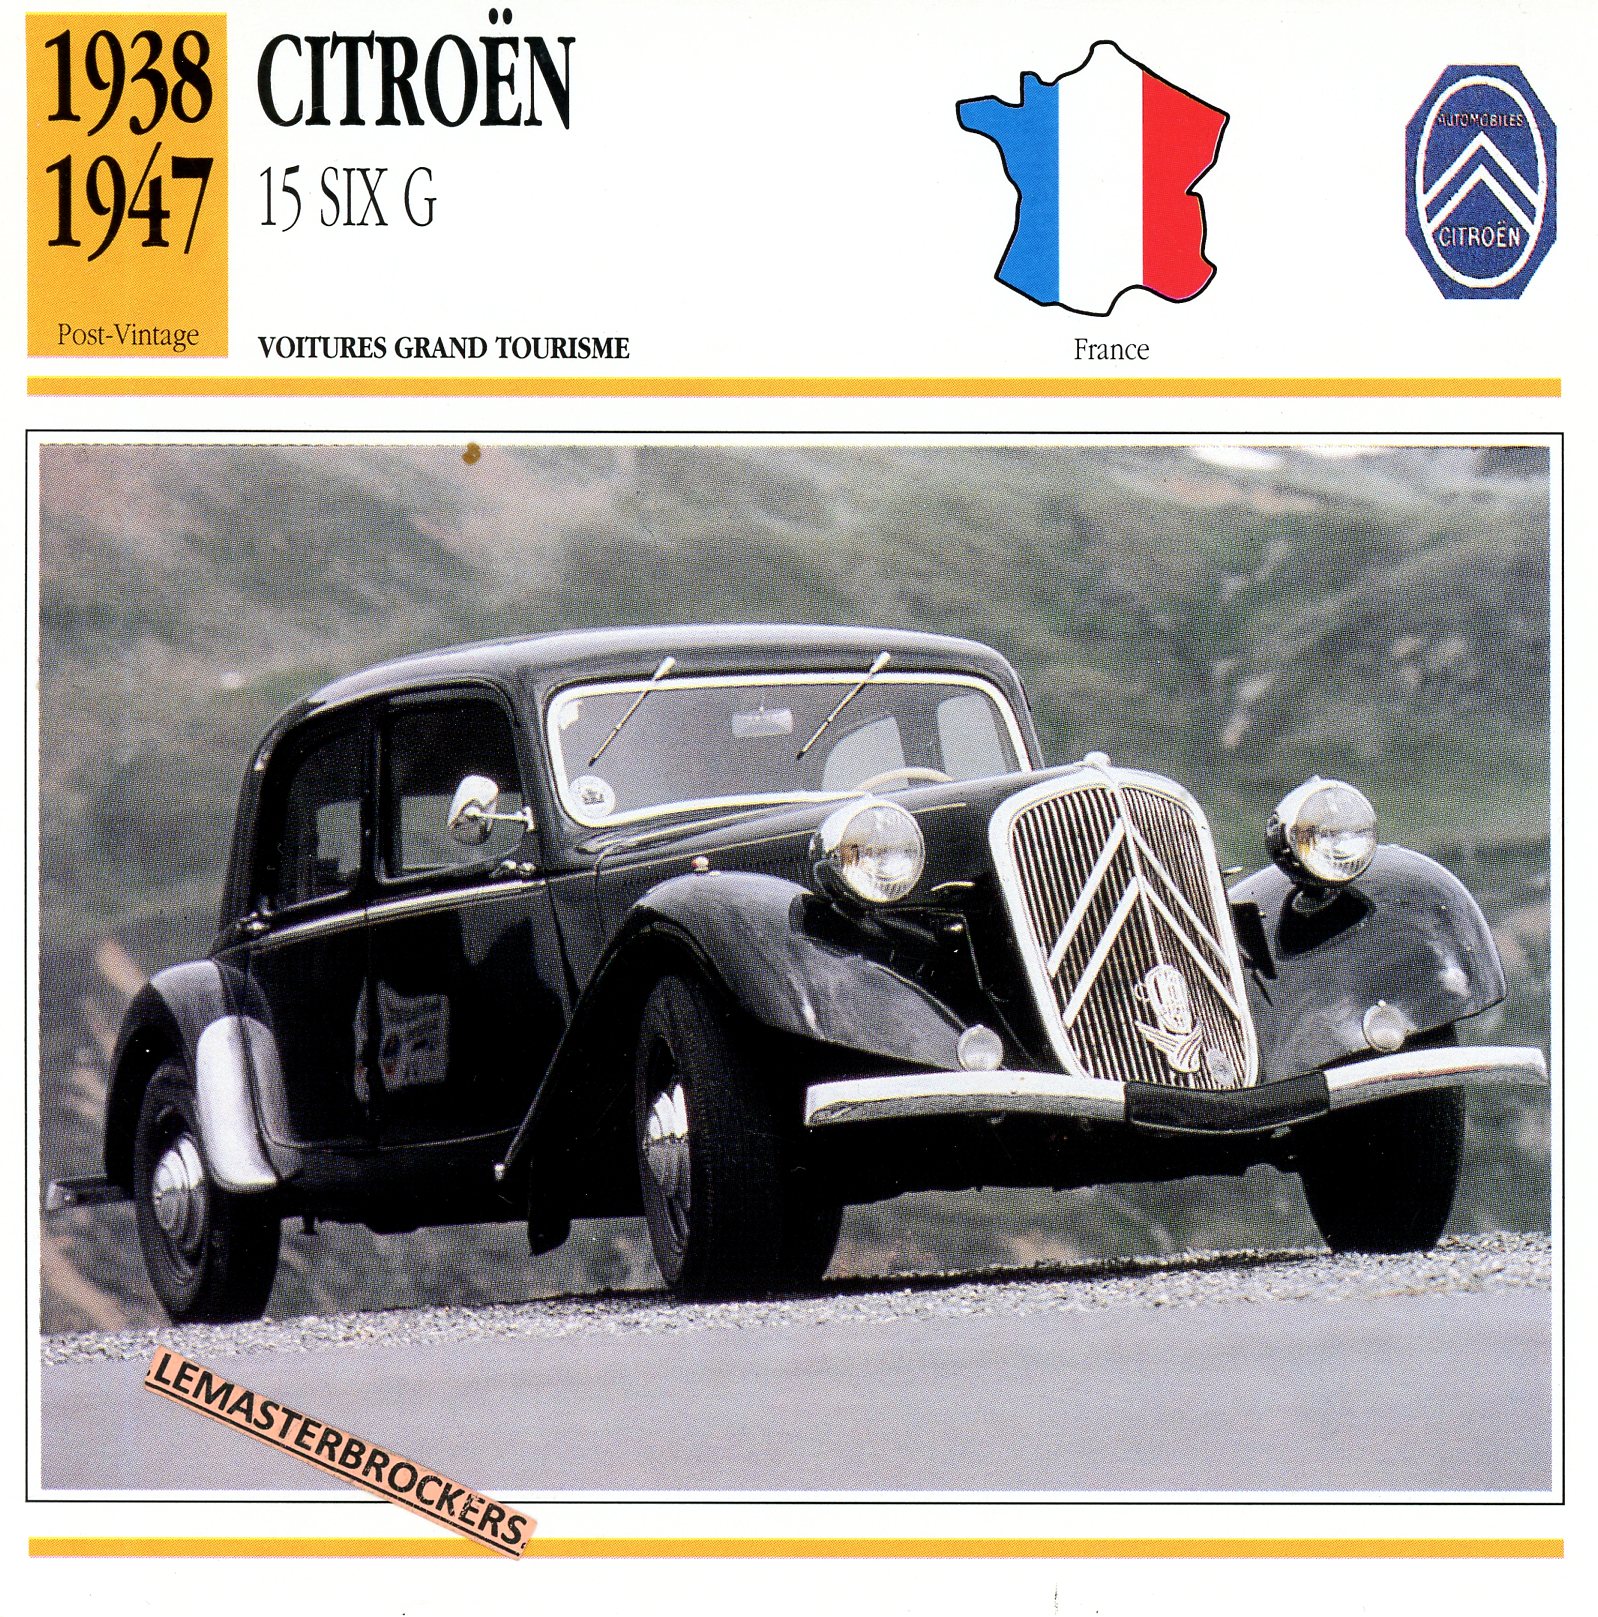 CITROËN-TRACTION-15-SIX-G-1947-FICHE-AUTO-CARD-CARS-LEMASTERBROCKERS